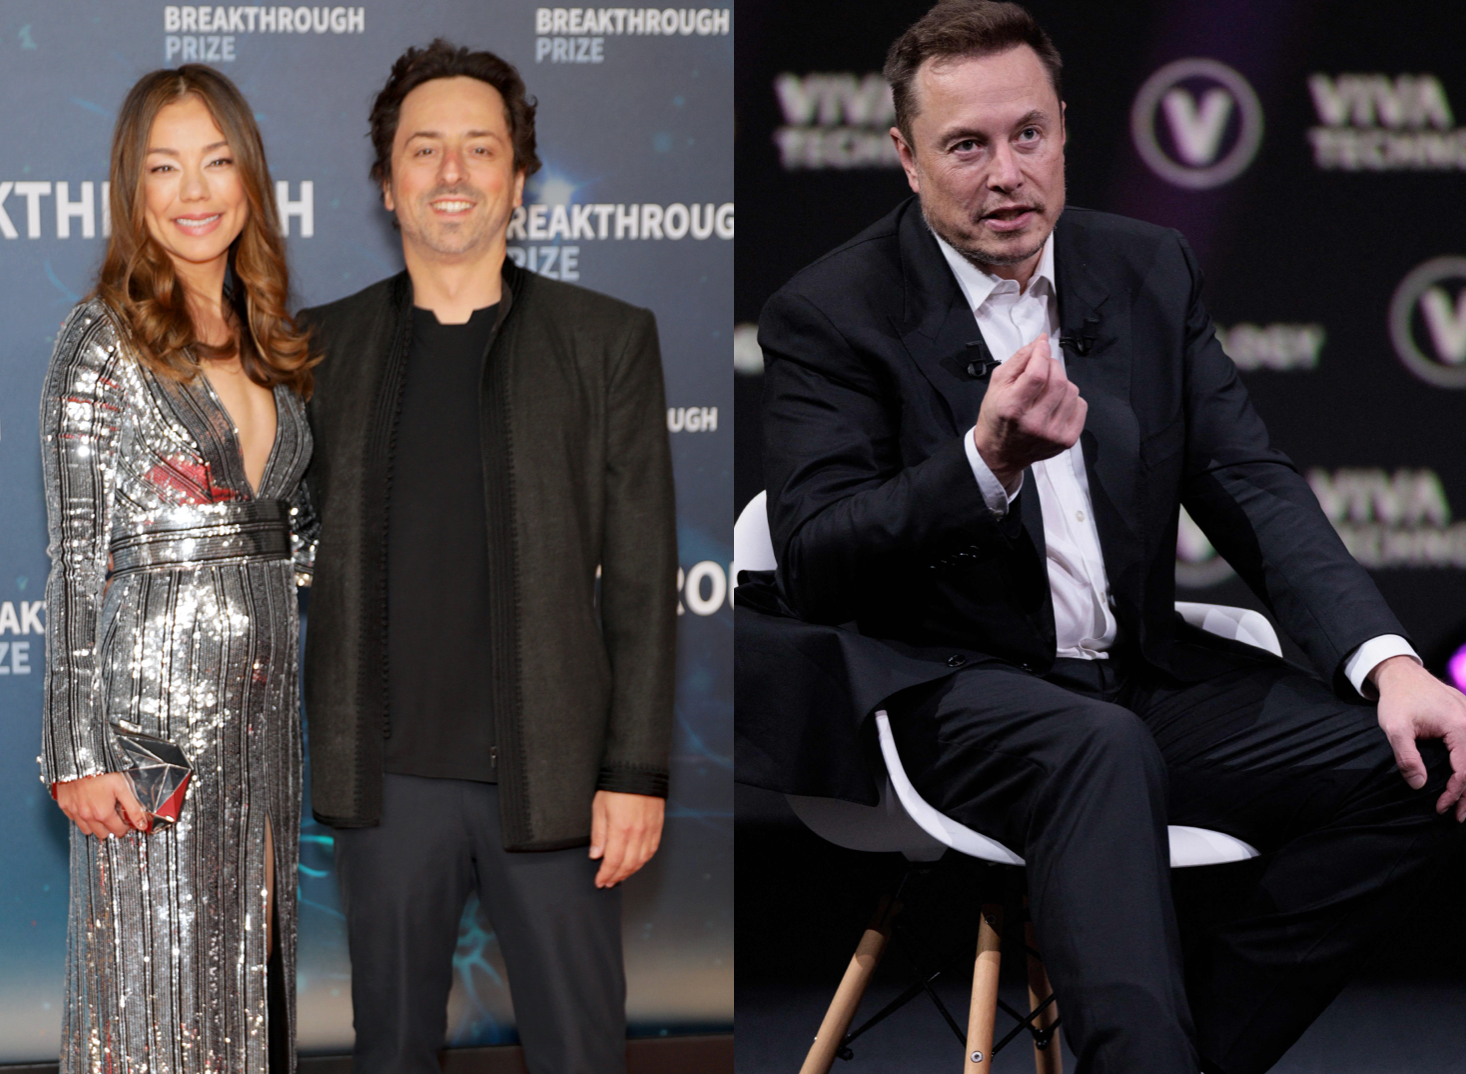 Shanahan shot to fame amid scandal in 2022 after the publication of a Wall Street Journal story alleging an affair between the businesswoman and SpaceX CEO Elon Musk while she was married to Google co-founder and billionaire Sergey Brin